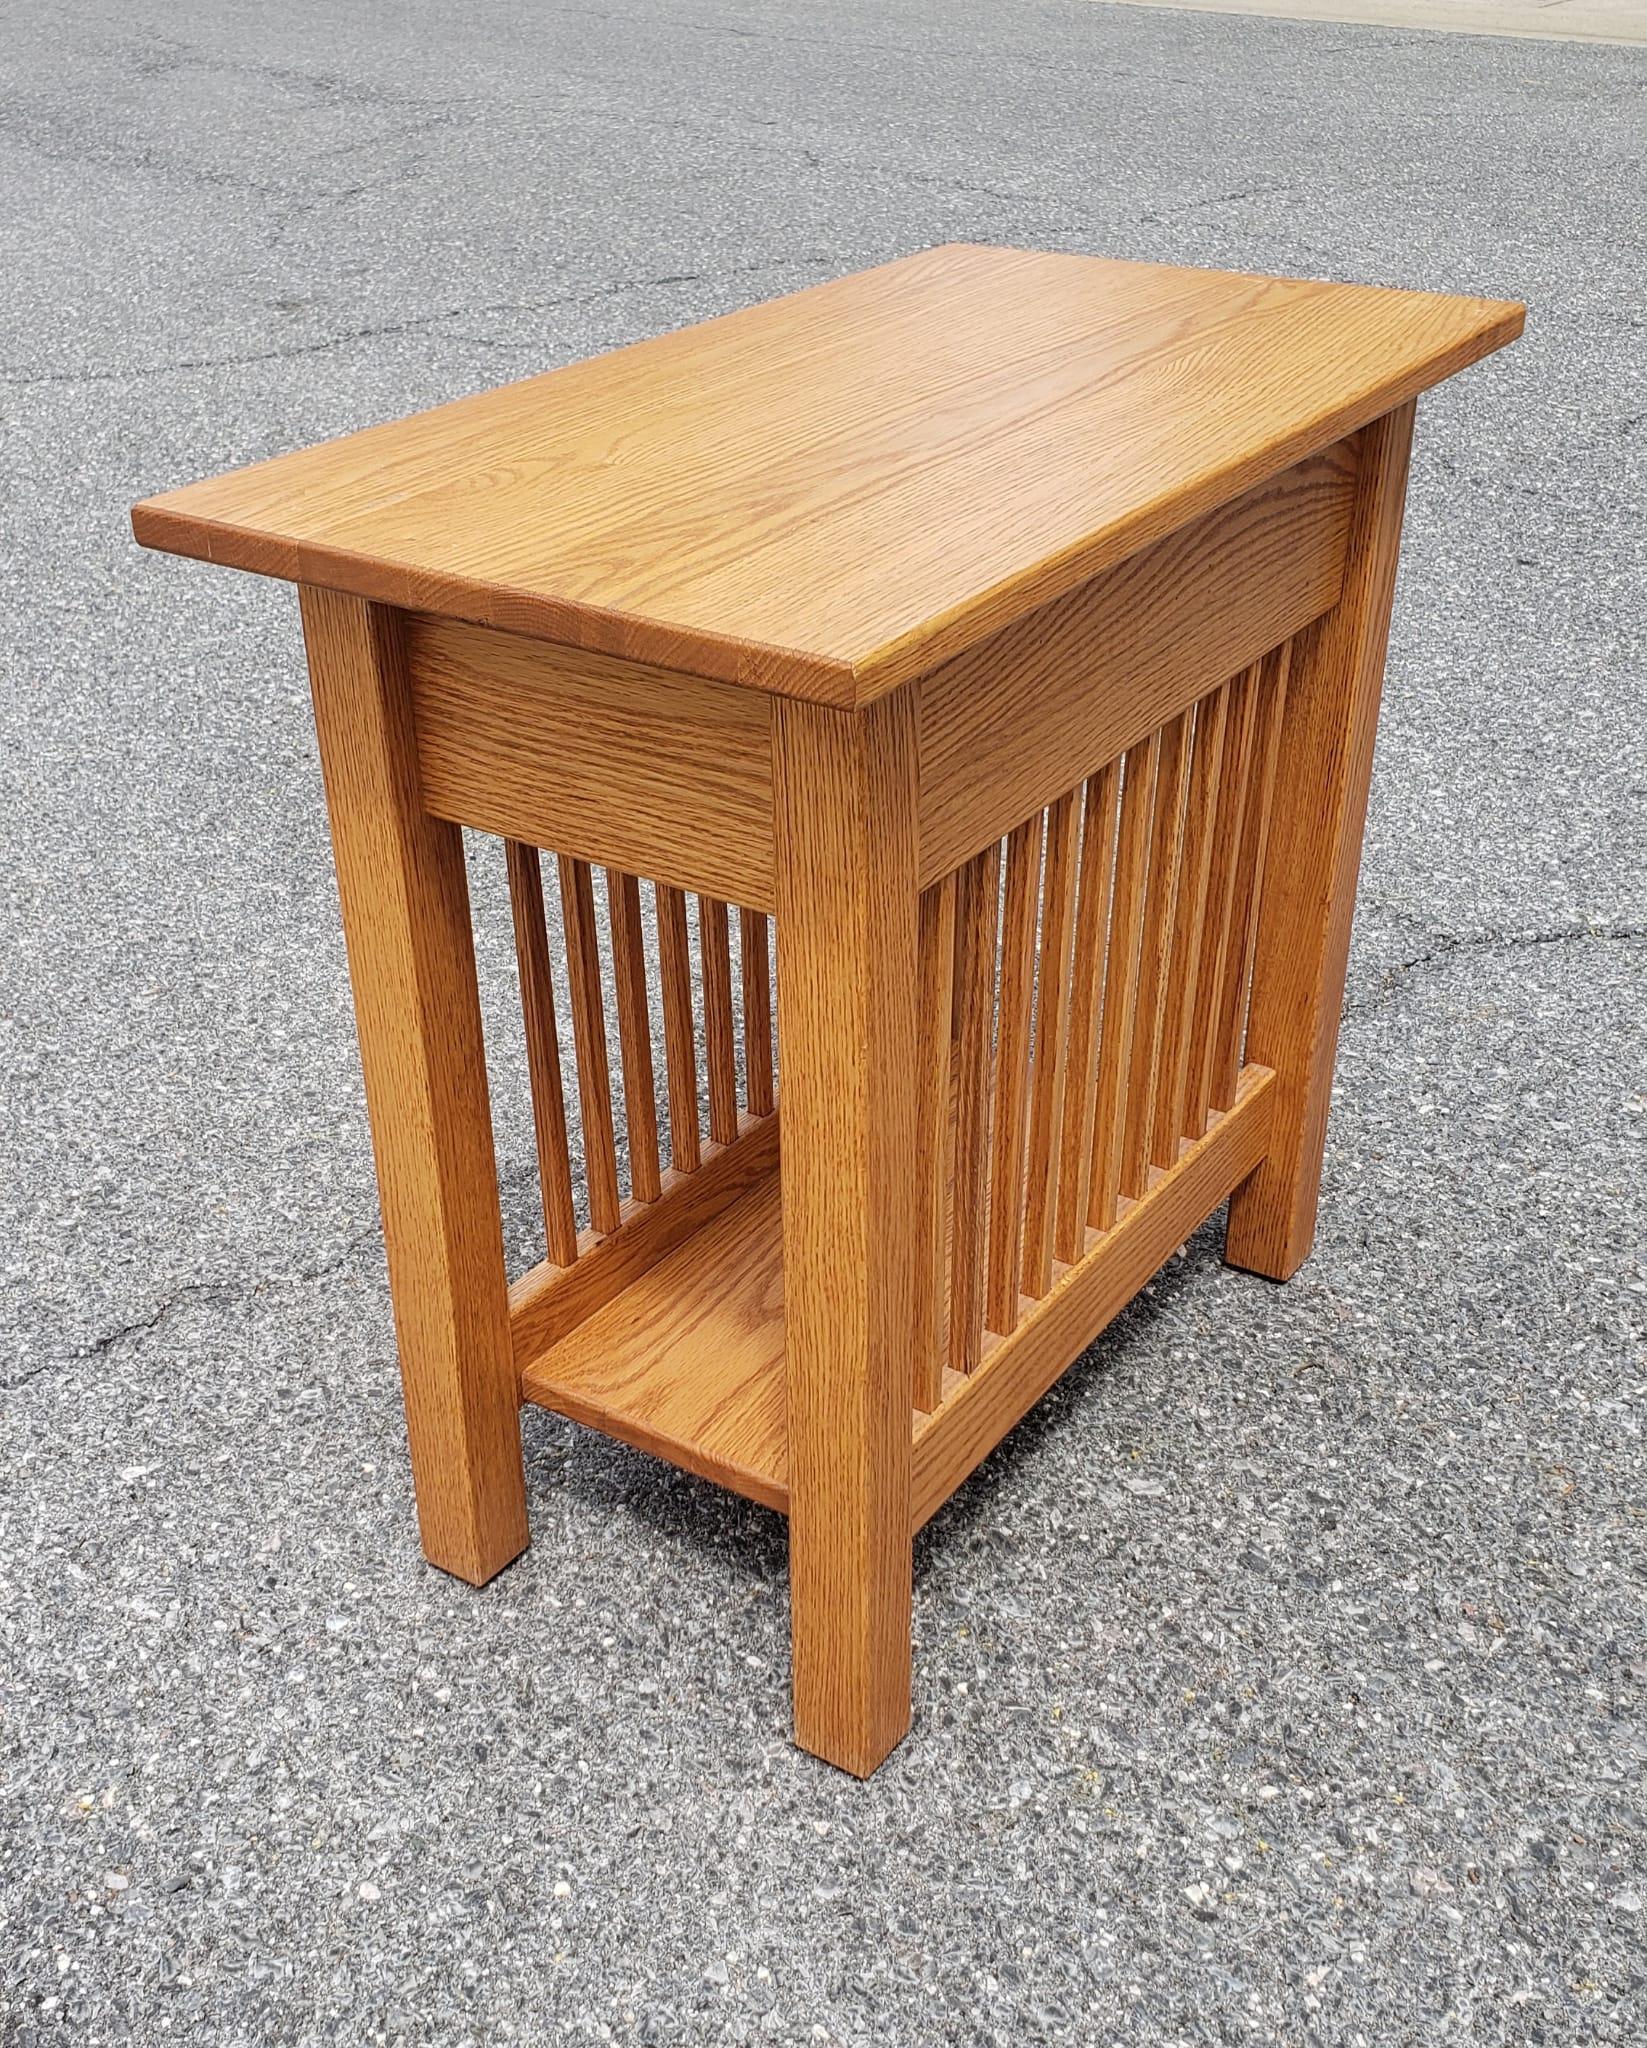 A pair of Fine quality Arts and Crafts USA Amish hand crafted Oak Side Tables in great vintage condition.
Measure 14